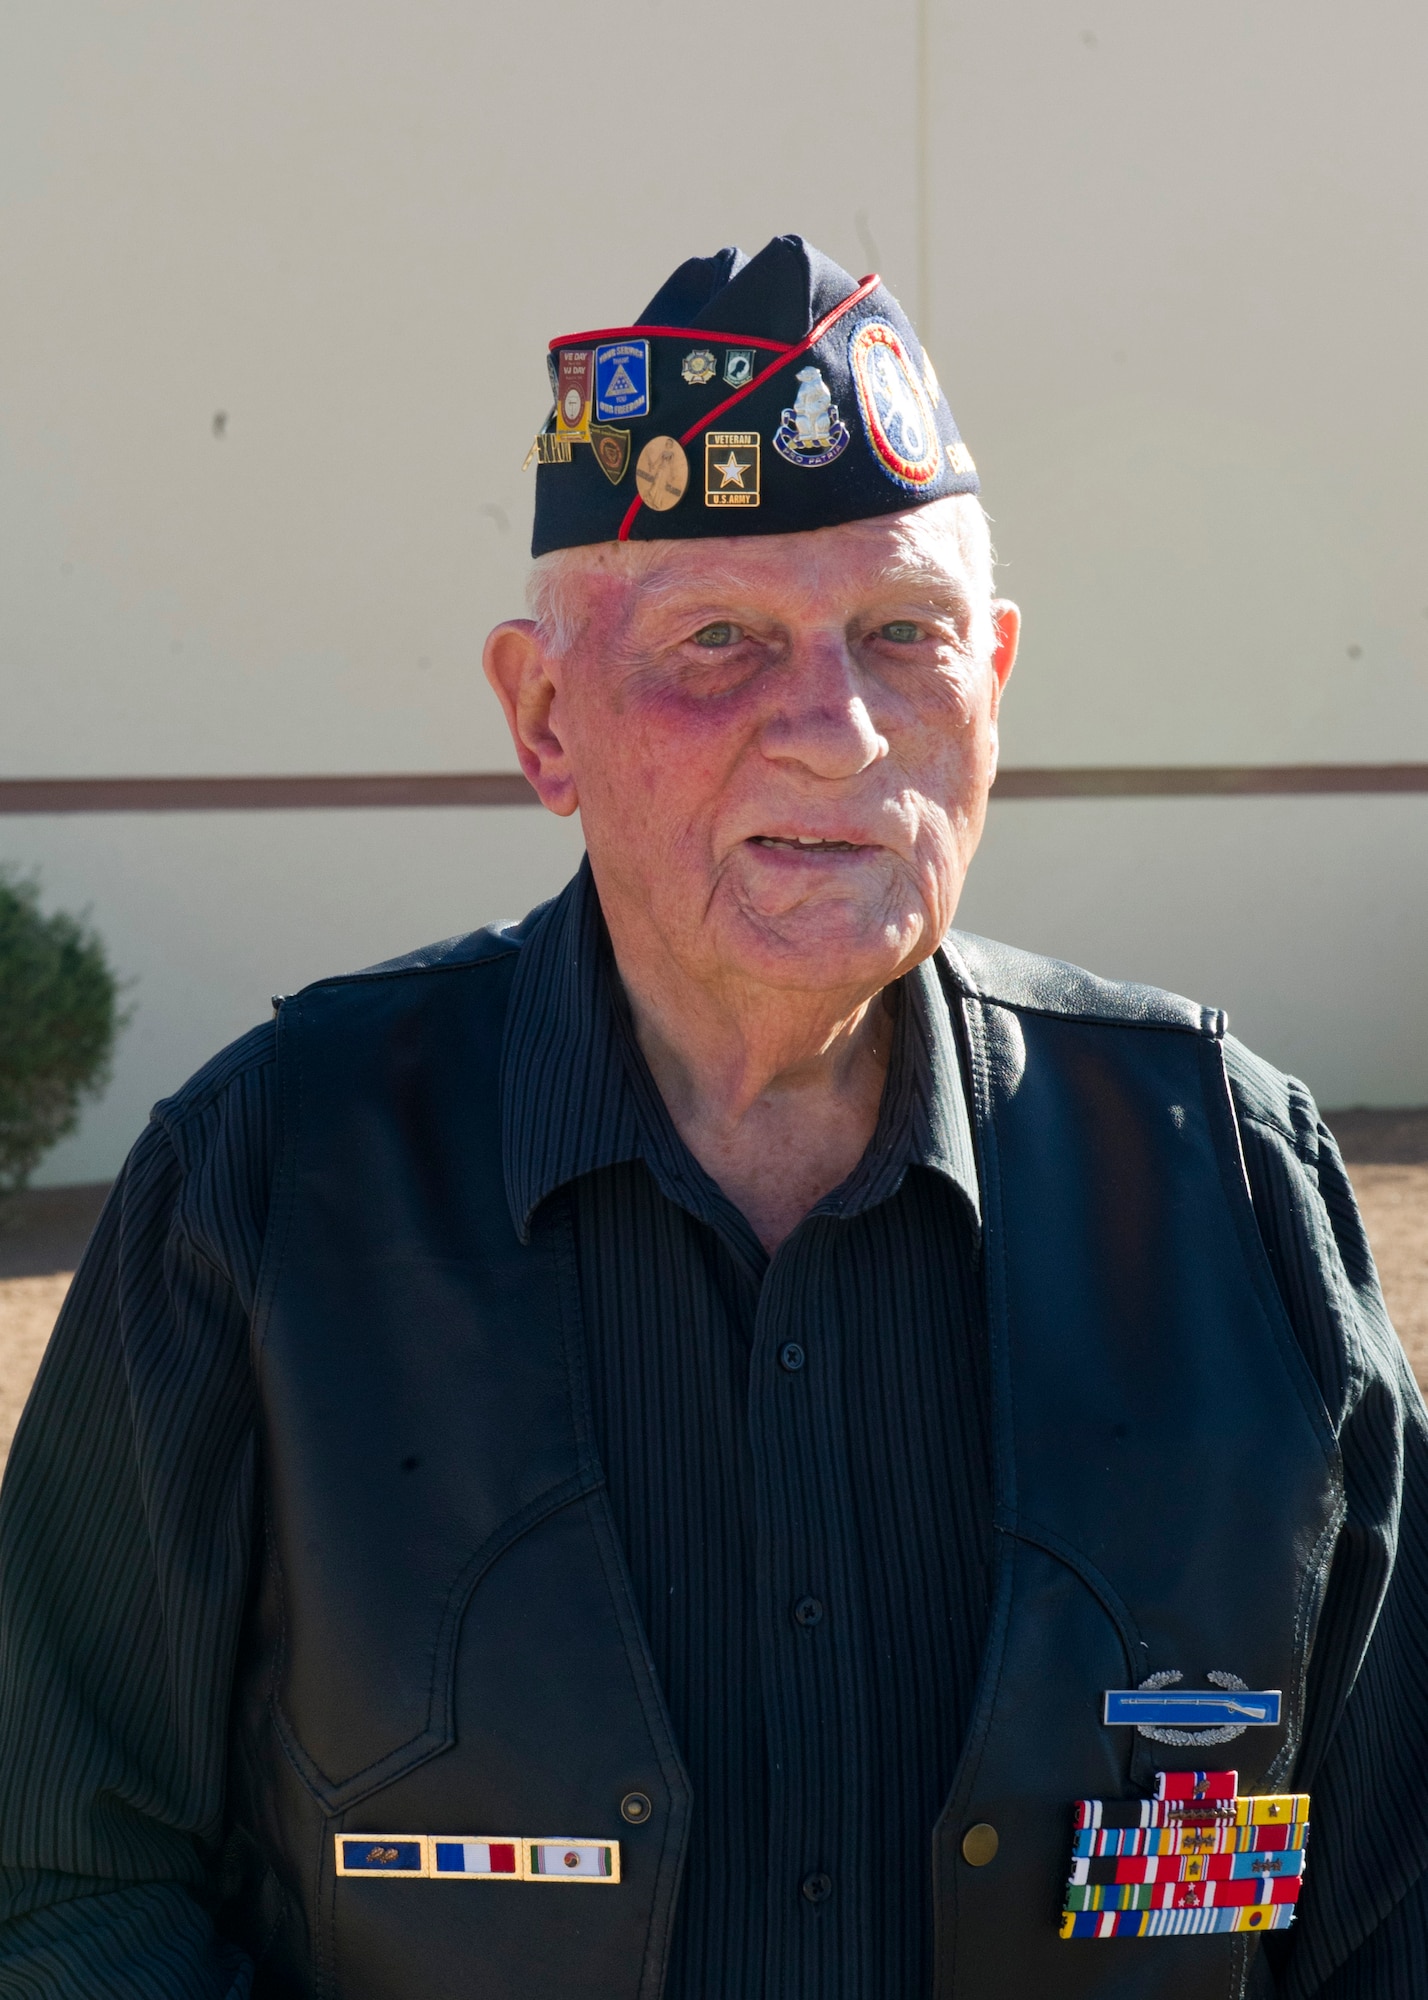 William Eldridge, a retired U.S. Army master sergeant, poses for a photo at White Sands Missile Range, N.M., March 24. Eldridge was taken prisoner by Japanese soldiers for three and a half years, and endured many hardships, including the Bataan Death March. After he was freed, Eldridge went on to serve 18 more years in the Army, and to this date, is the last surviving member of his unit, Company M, 31st Regiment. (U.S. Air Force photo by Airman 1st Class Siuta B. Ika/Released)